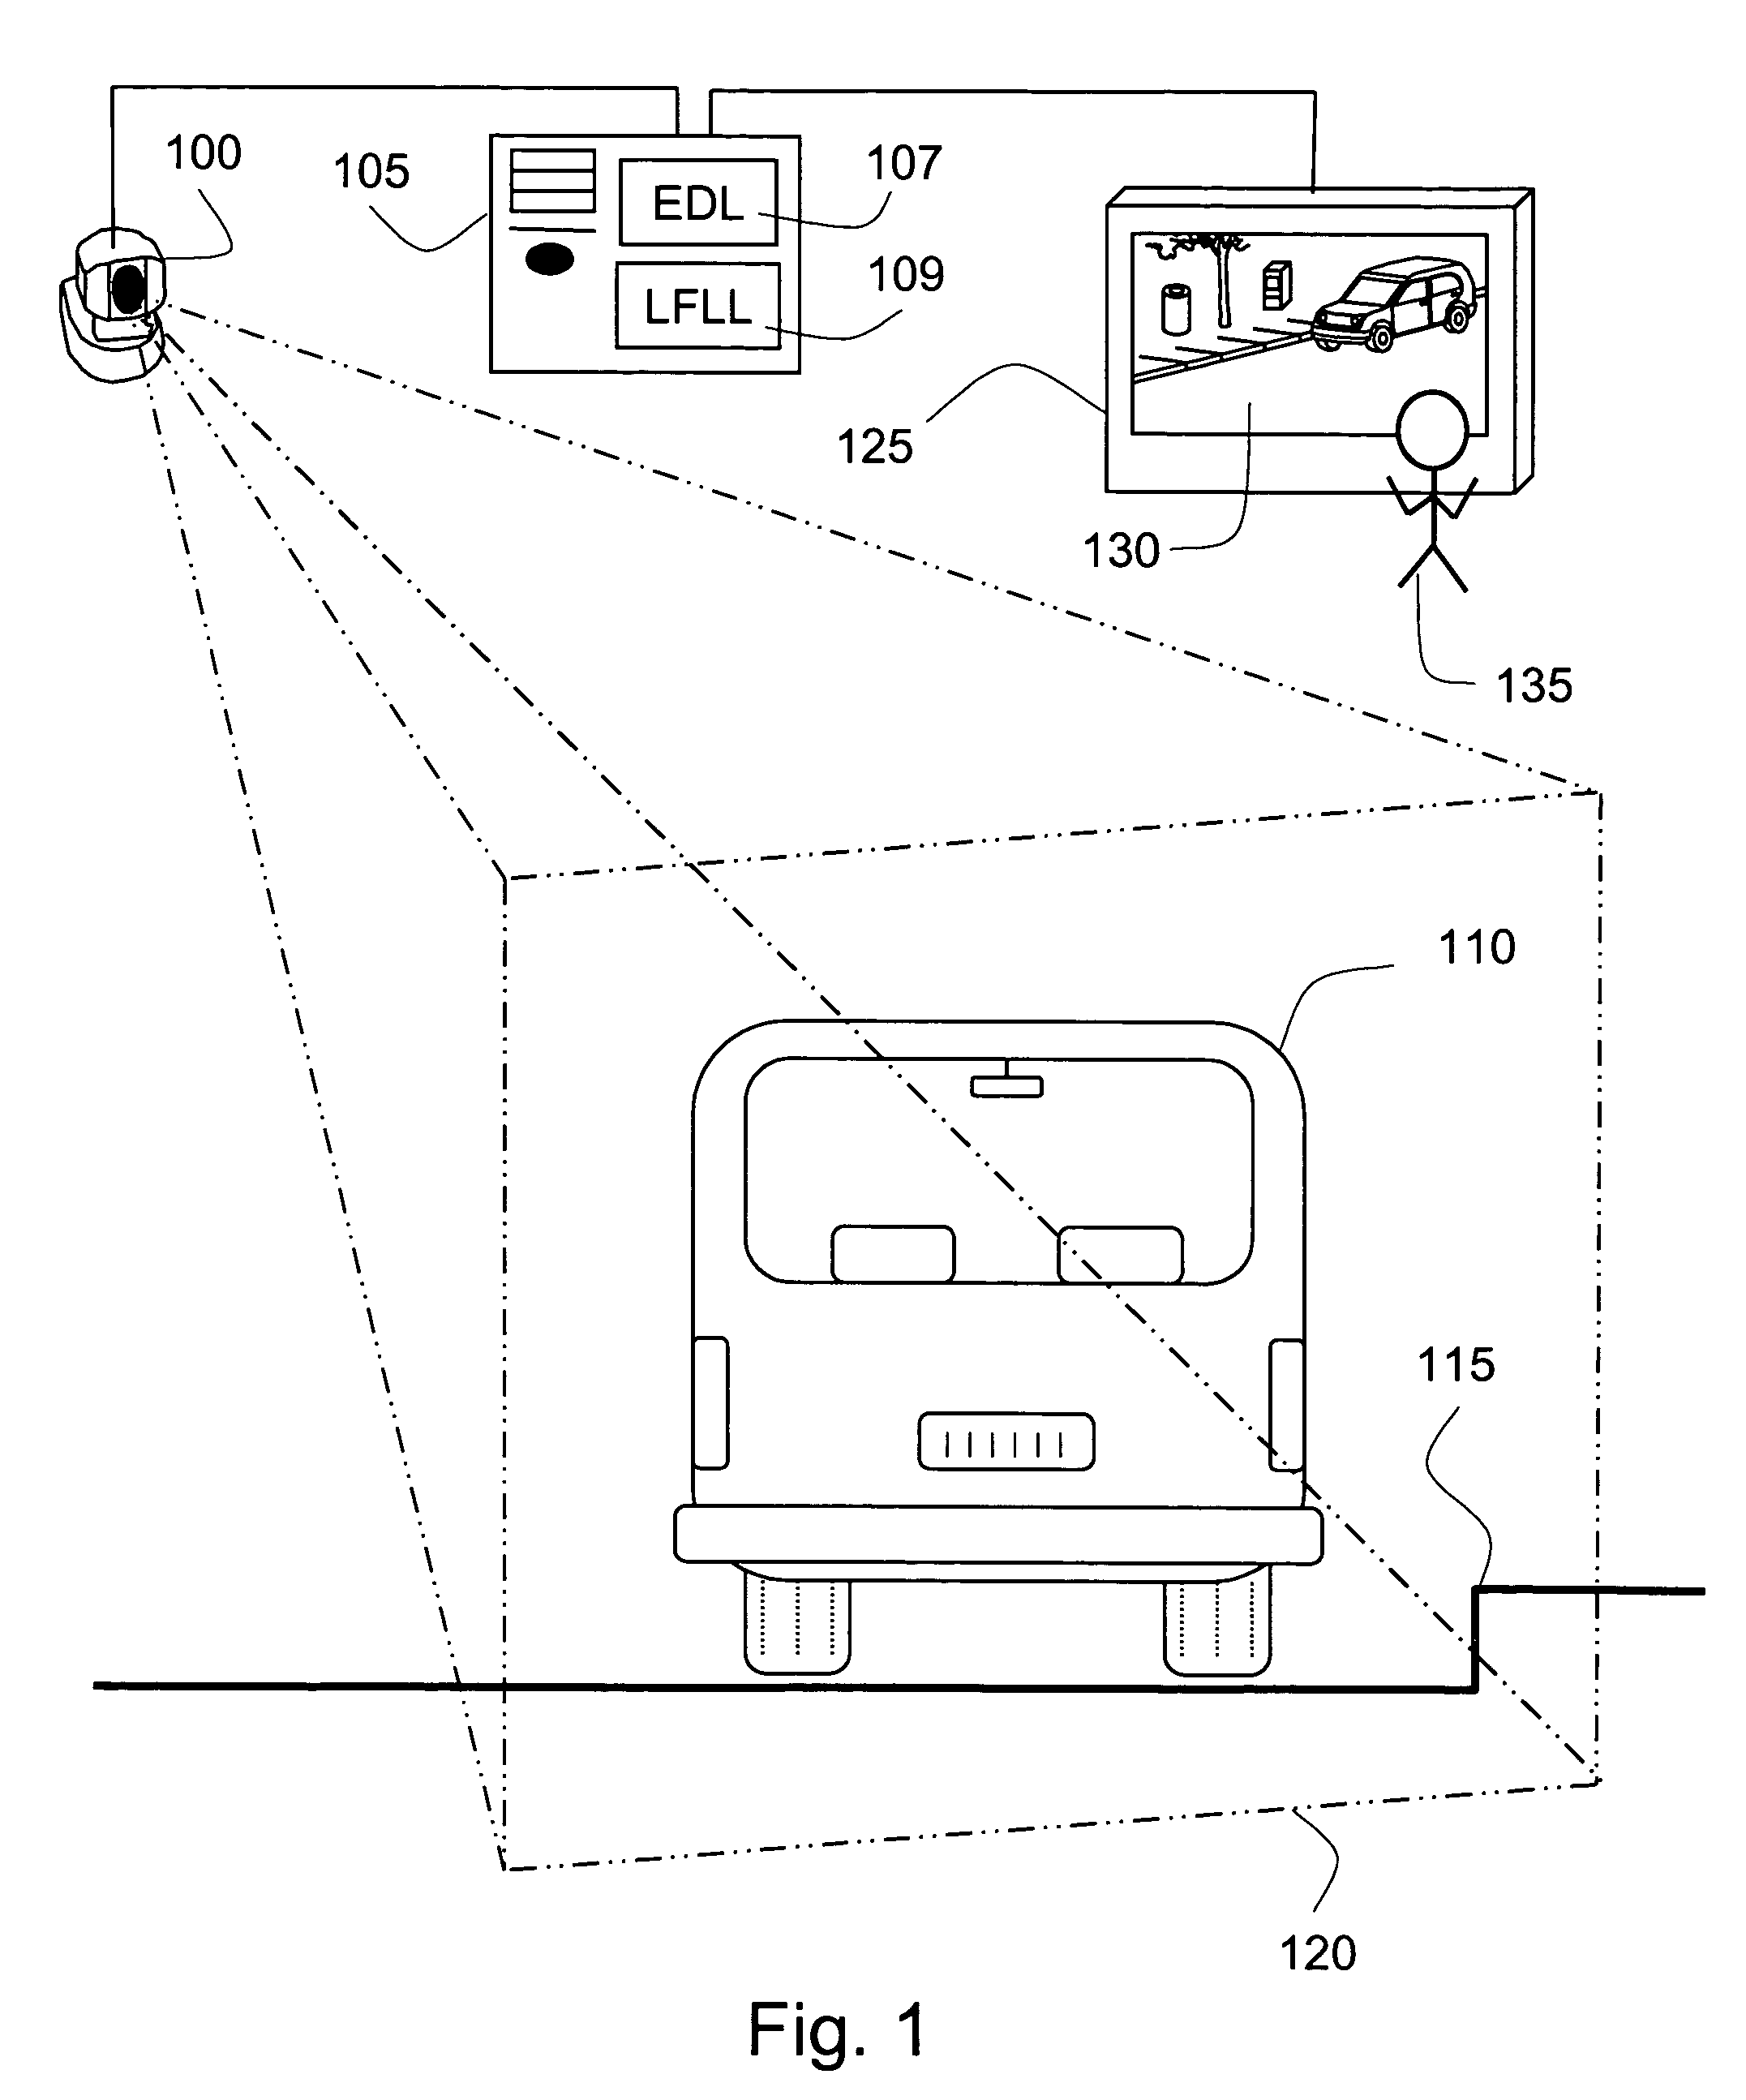 Method and system for event detection by analysis of linear feature occlusion